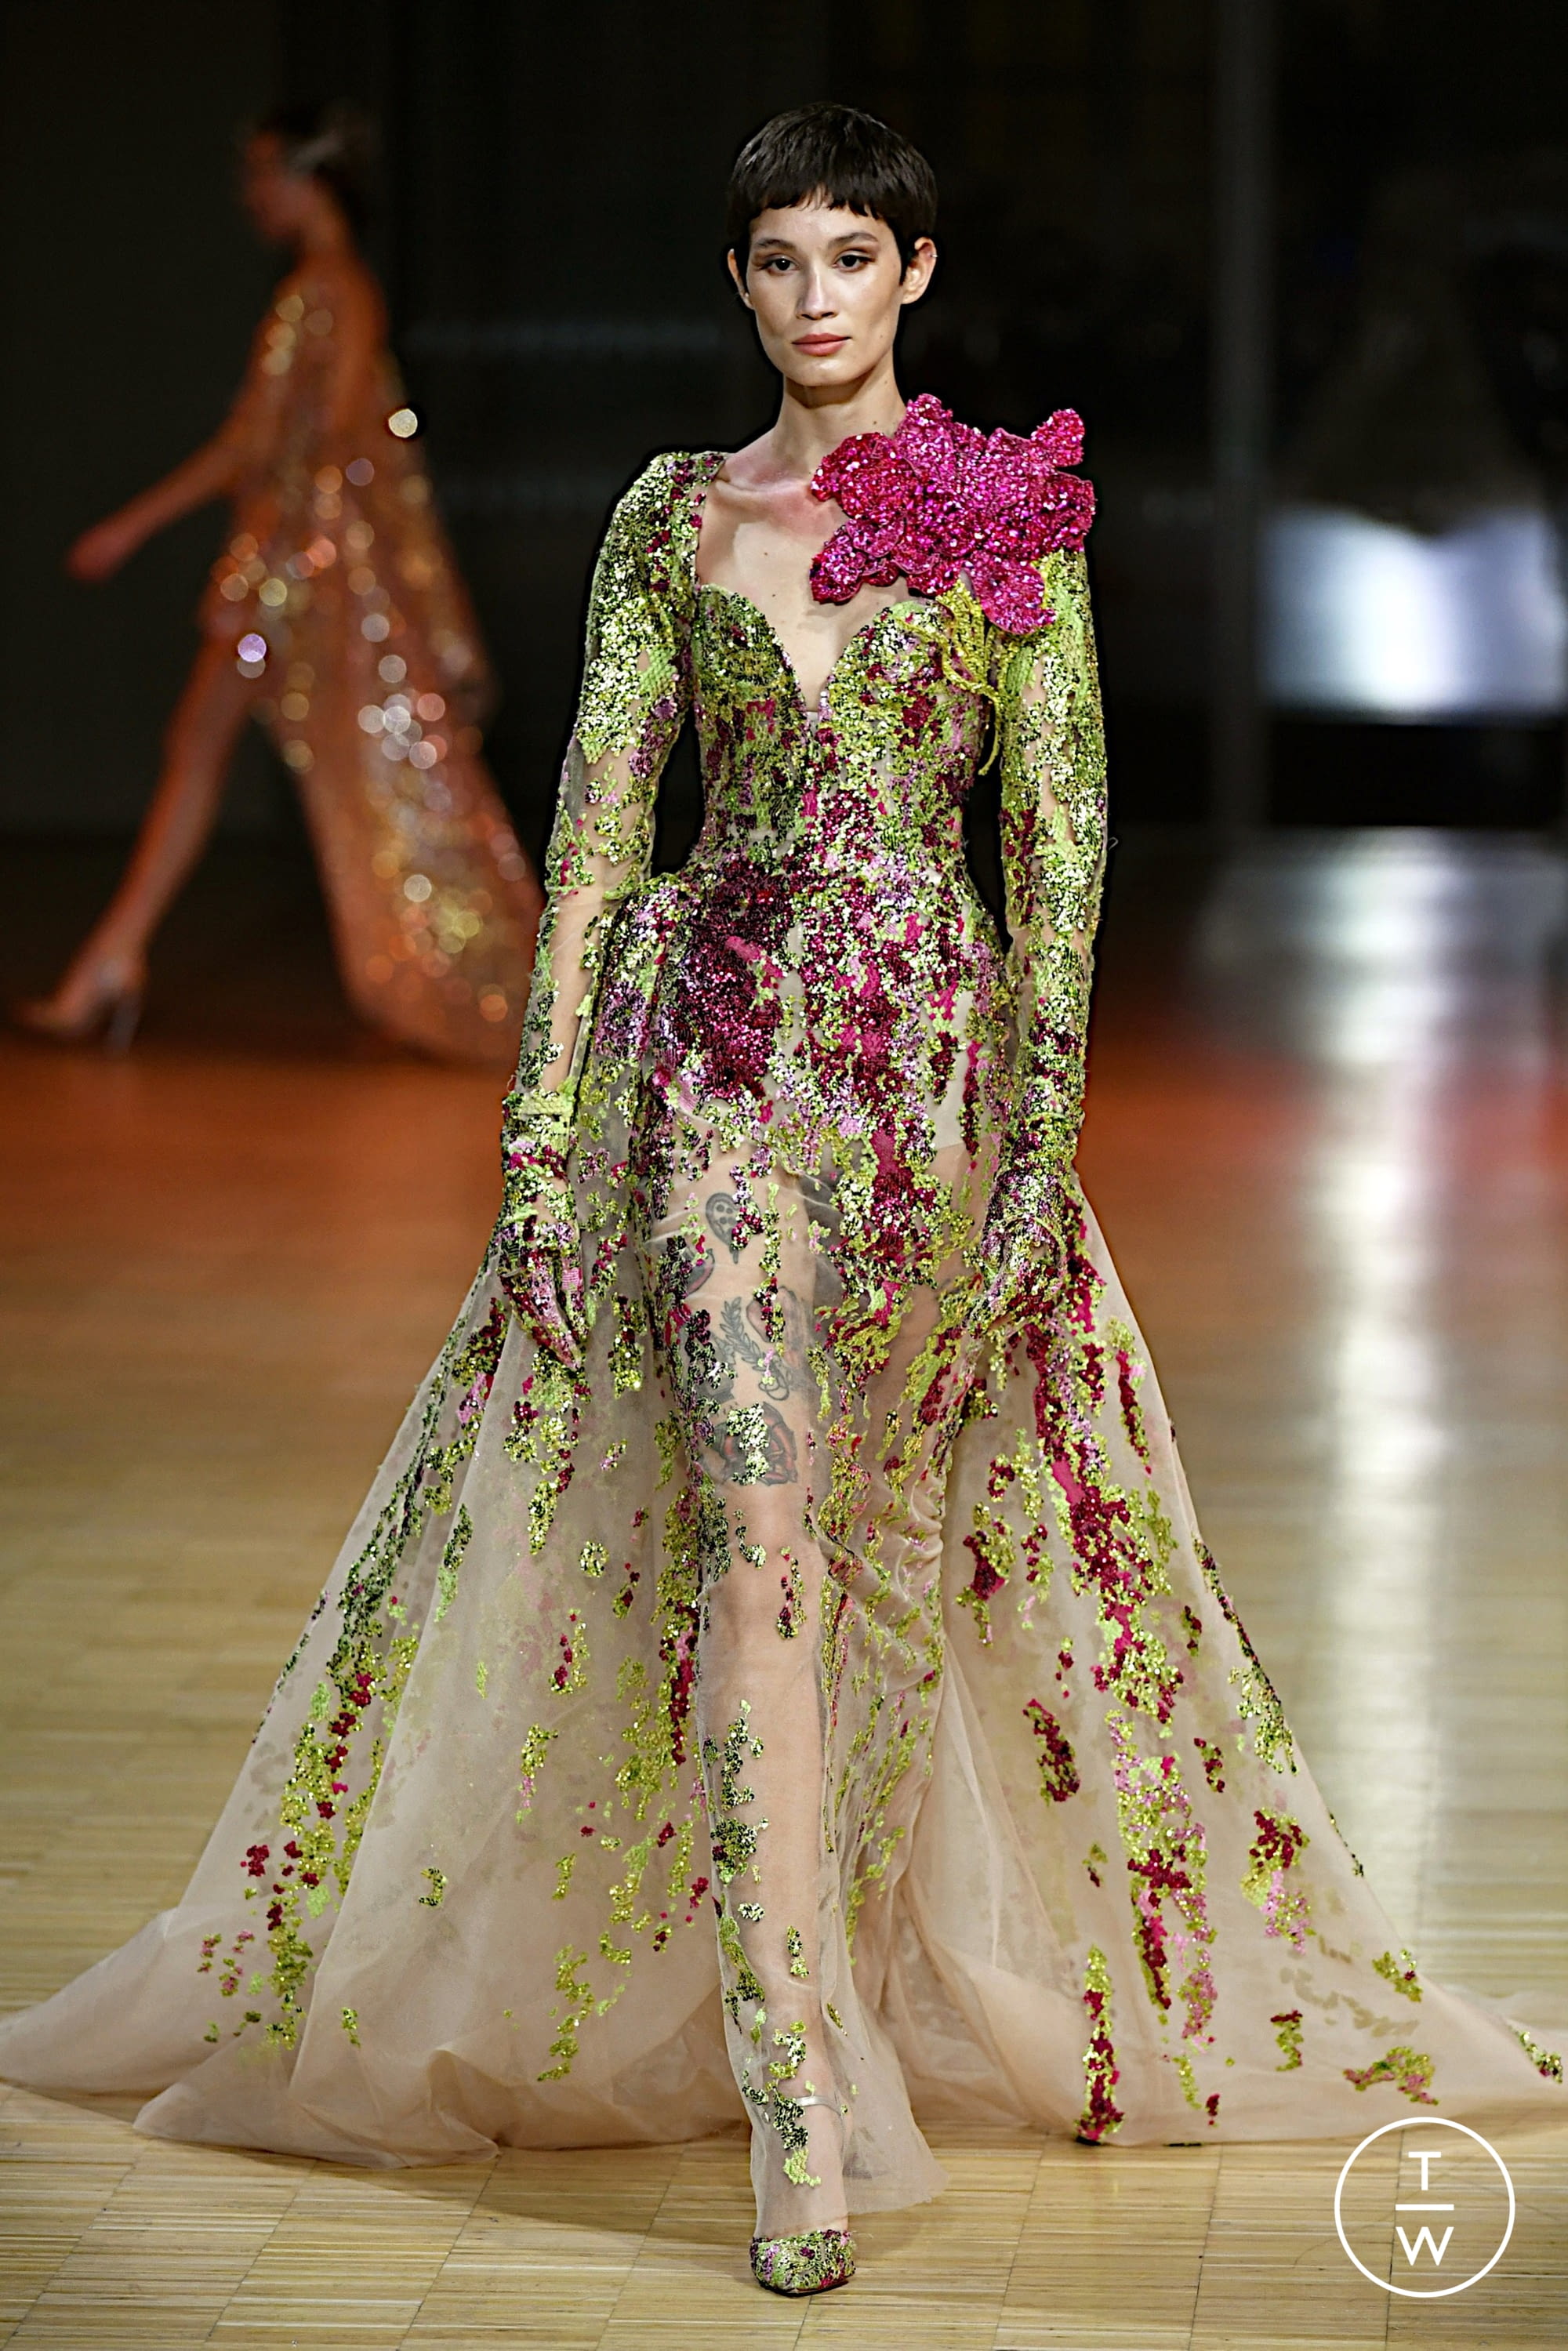 Elie Saab's Couture Collection Brings Mediterranean Color And